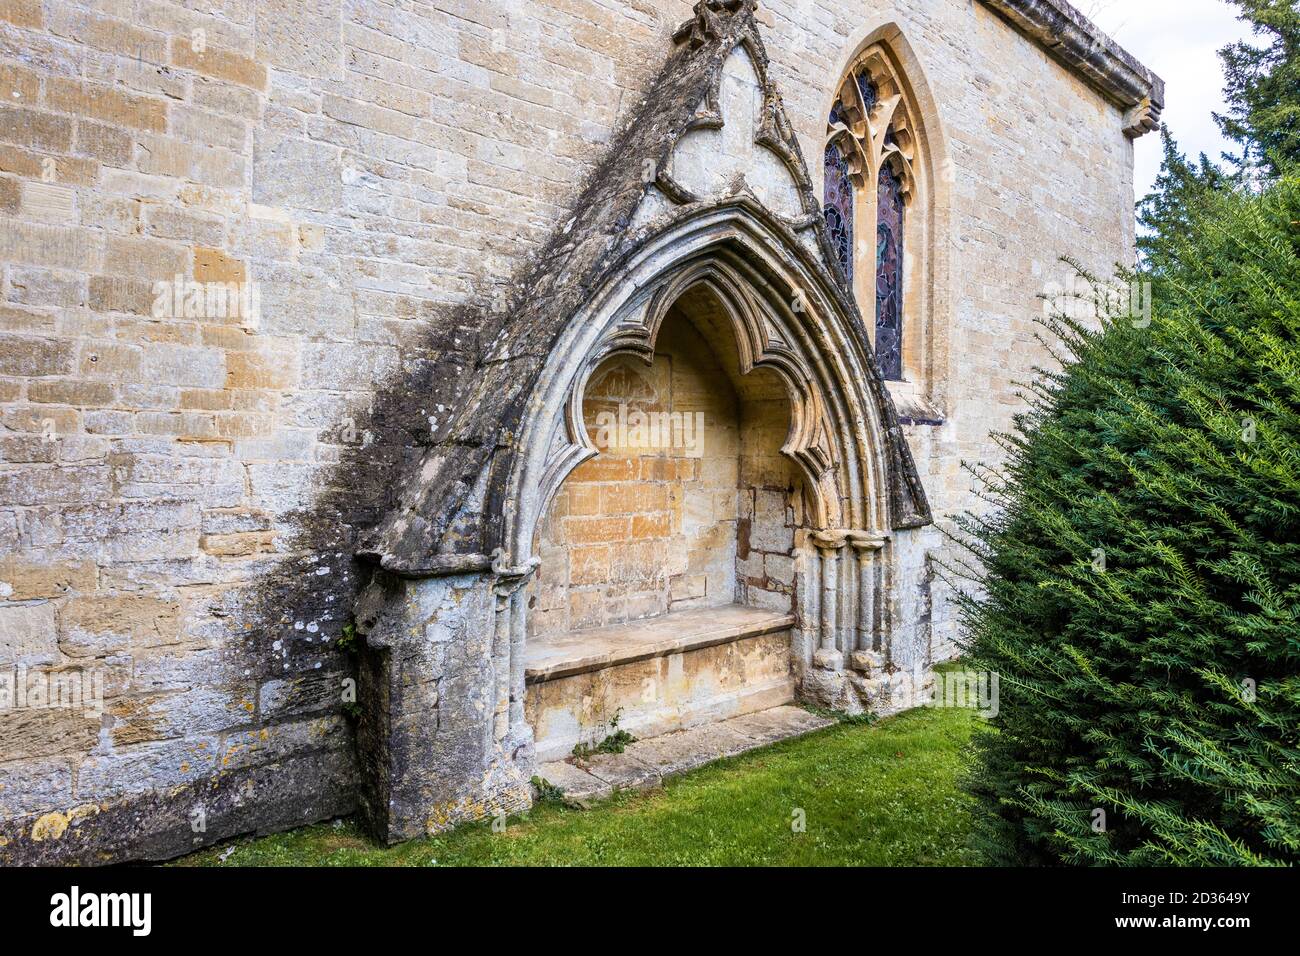 An ornate 13th century canopied recess on the south wall of the chancel of  the parish church of All Saints in the Cotswold village of Bisley, Glos. Stock Photo